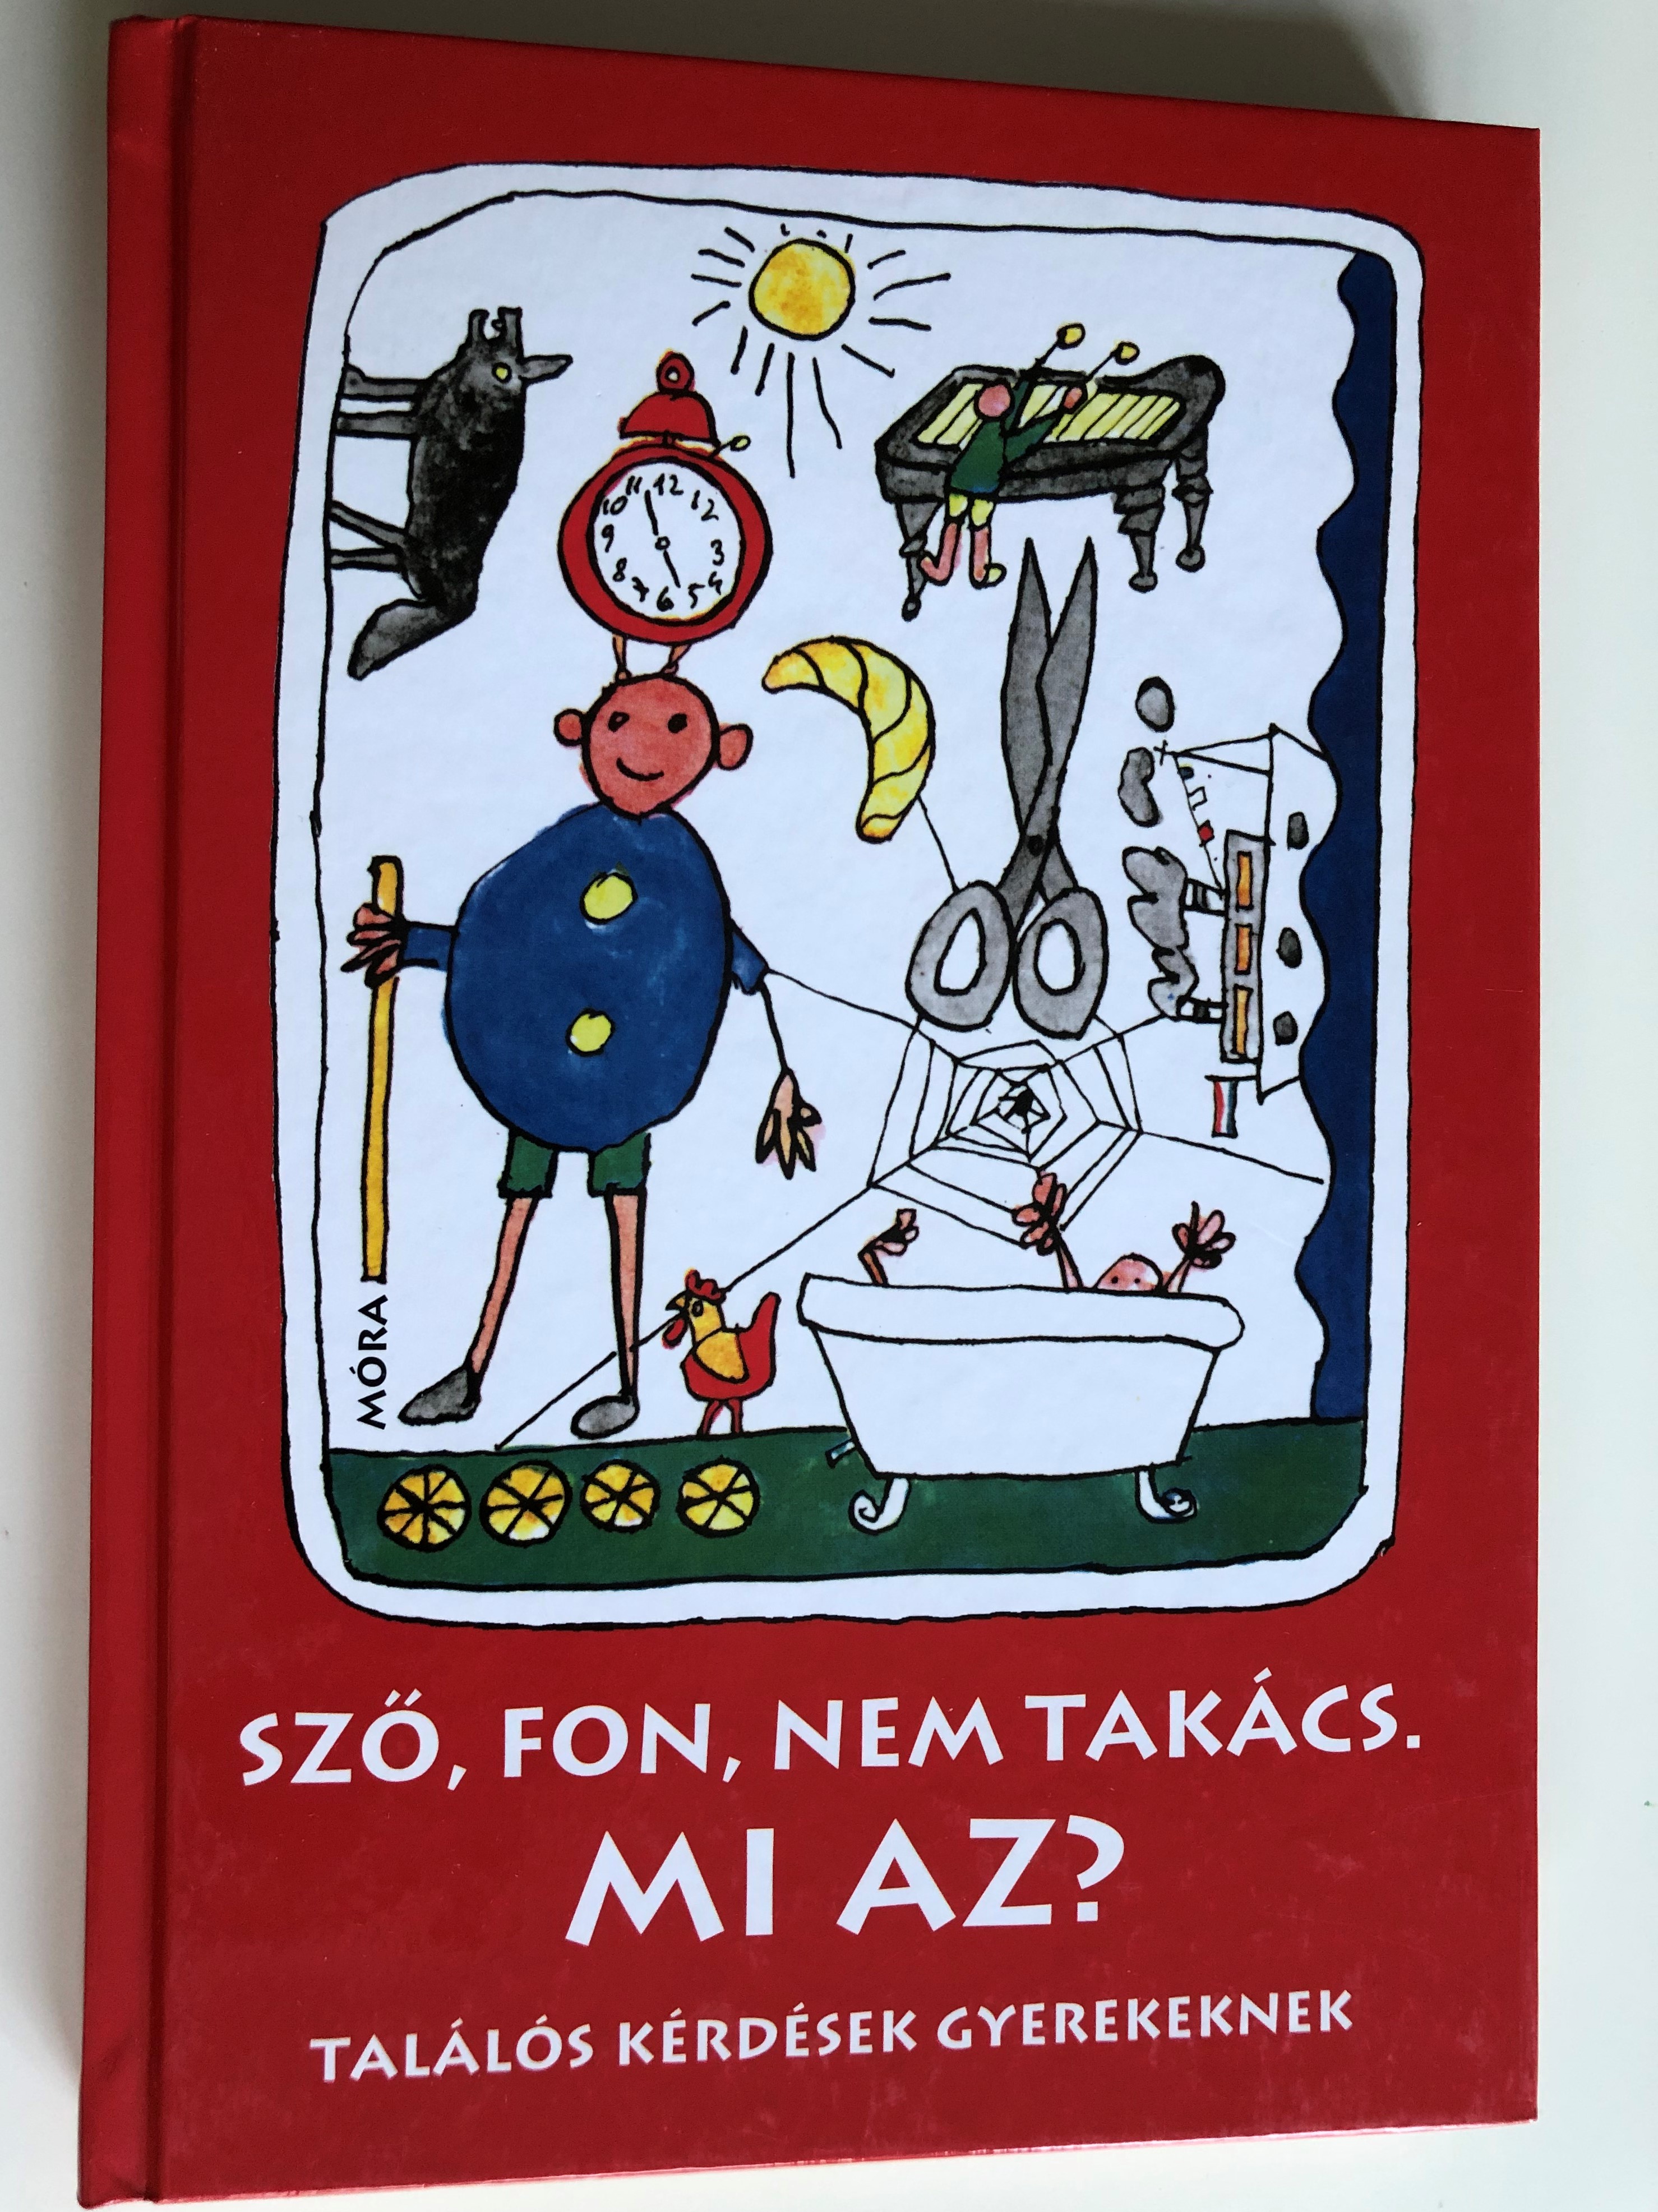 sz-fon-nem-tak-cs.-mi-az-tal-l-s-k-rd-sek-gyermekeknek-by-varga-ferencn-hungarian-riddles-for-children-illustrations-by-b-lint-endre-9th-edition-m-ra-k-nyvkiad-2012-1-.jpg